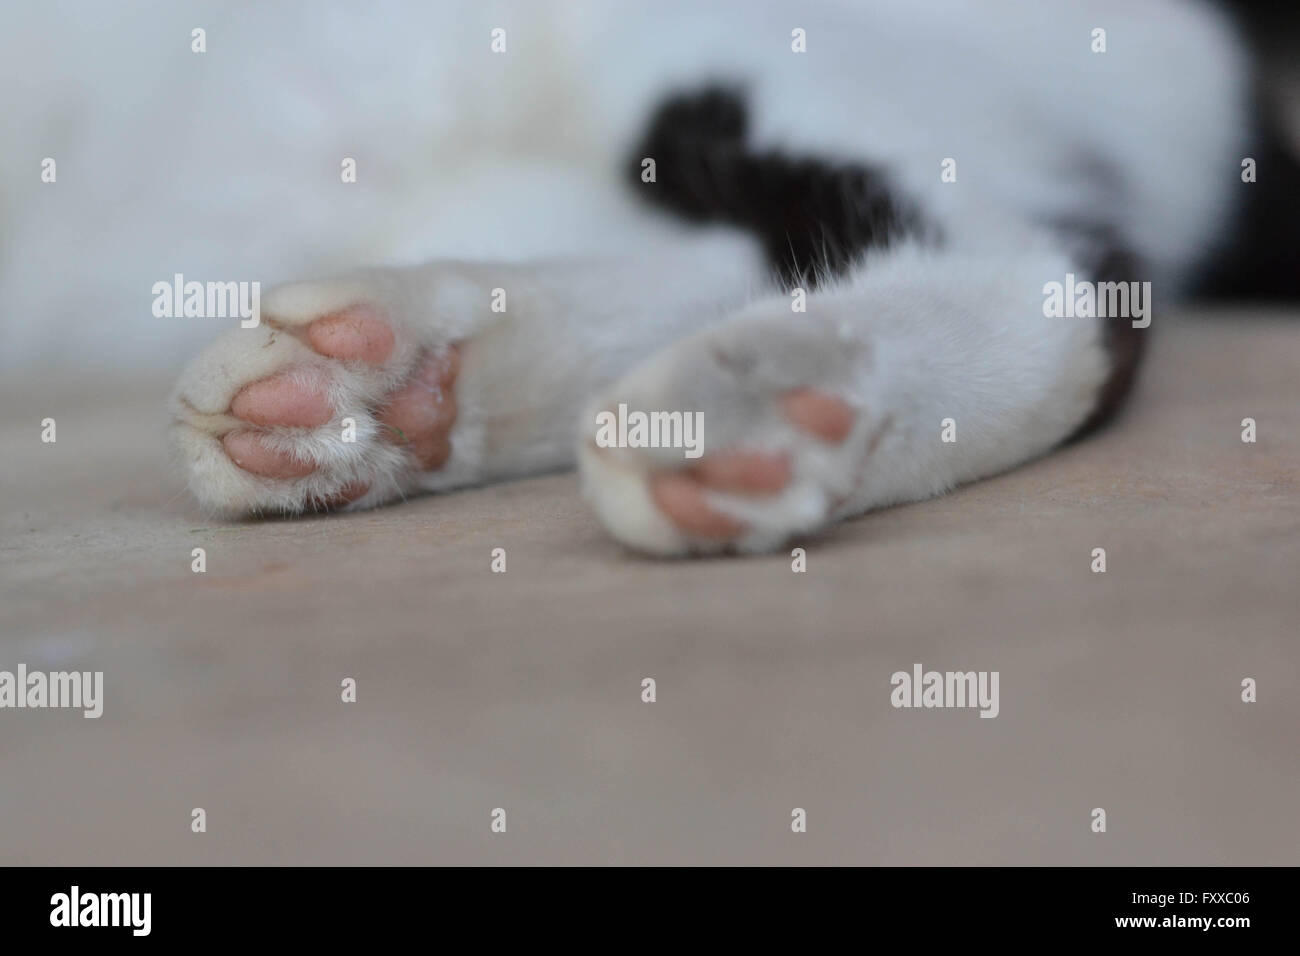 Cat paws on its back feet. Black and white cat. White paws with pink pads. Stock Photo